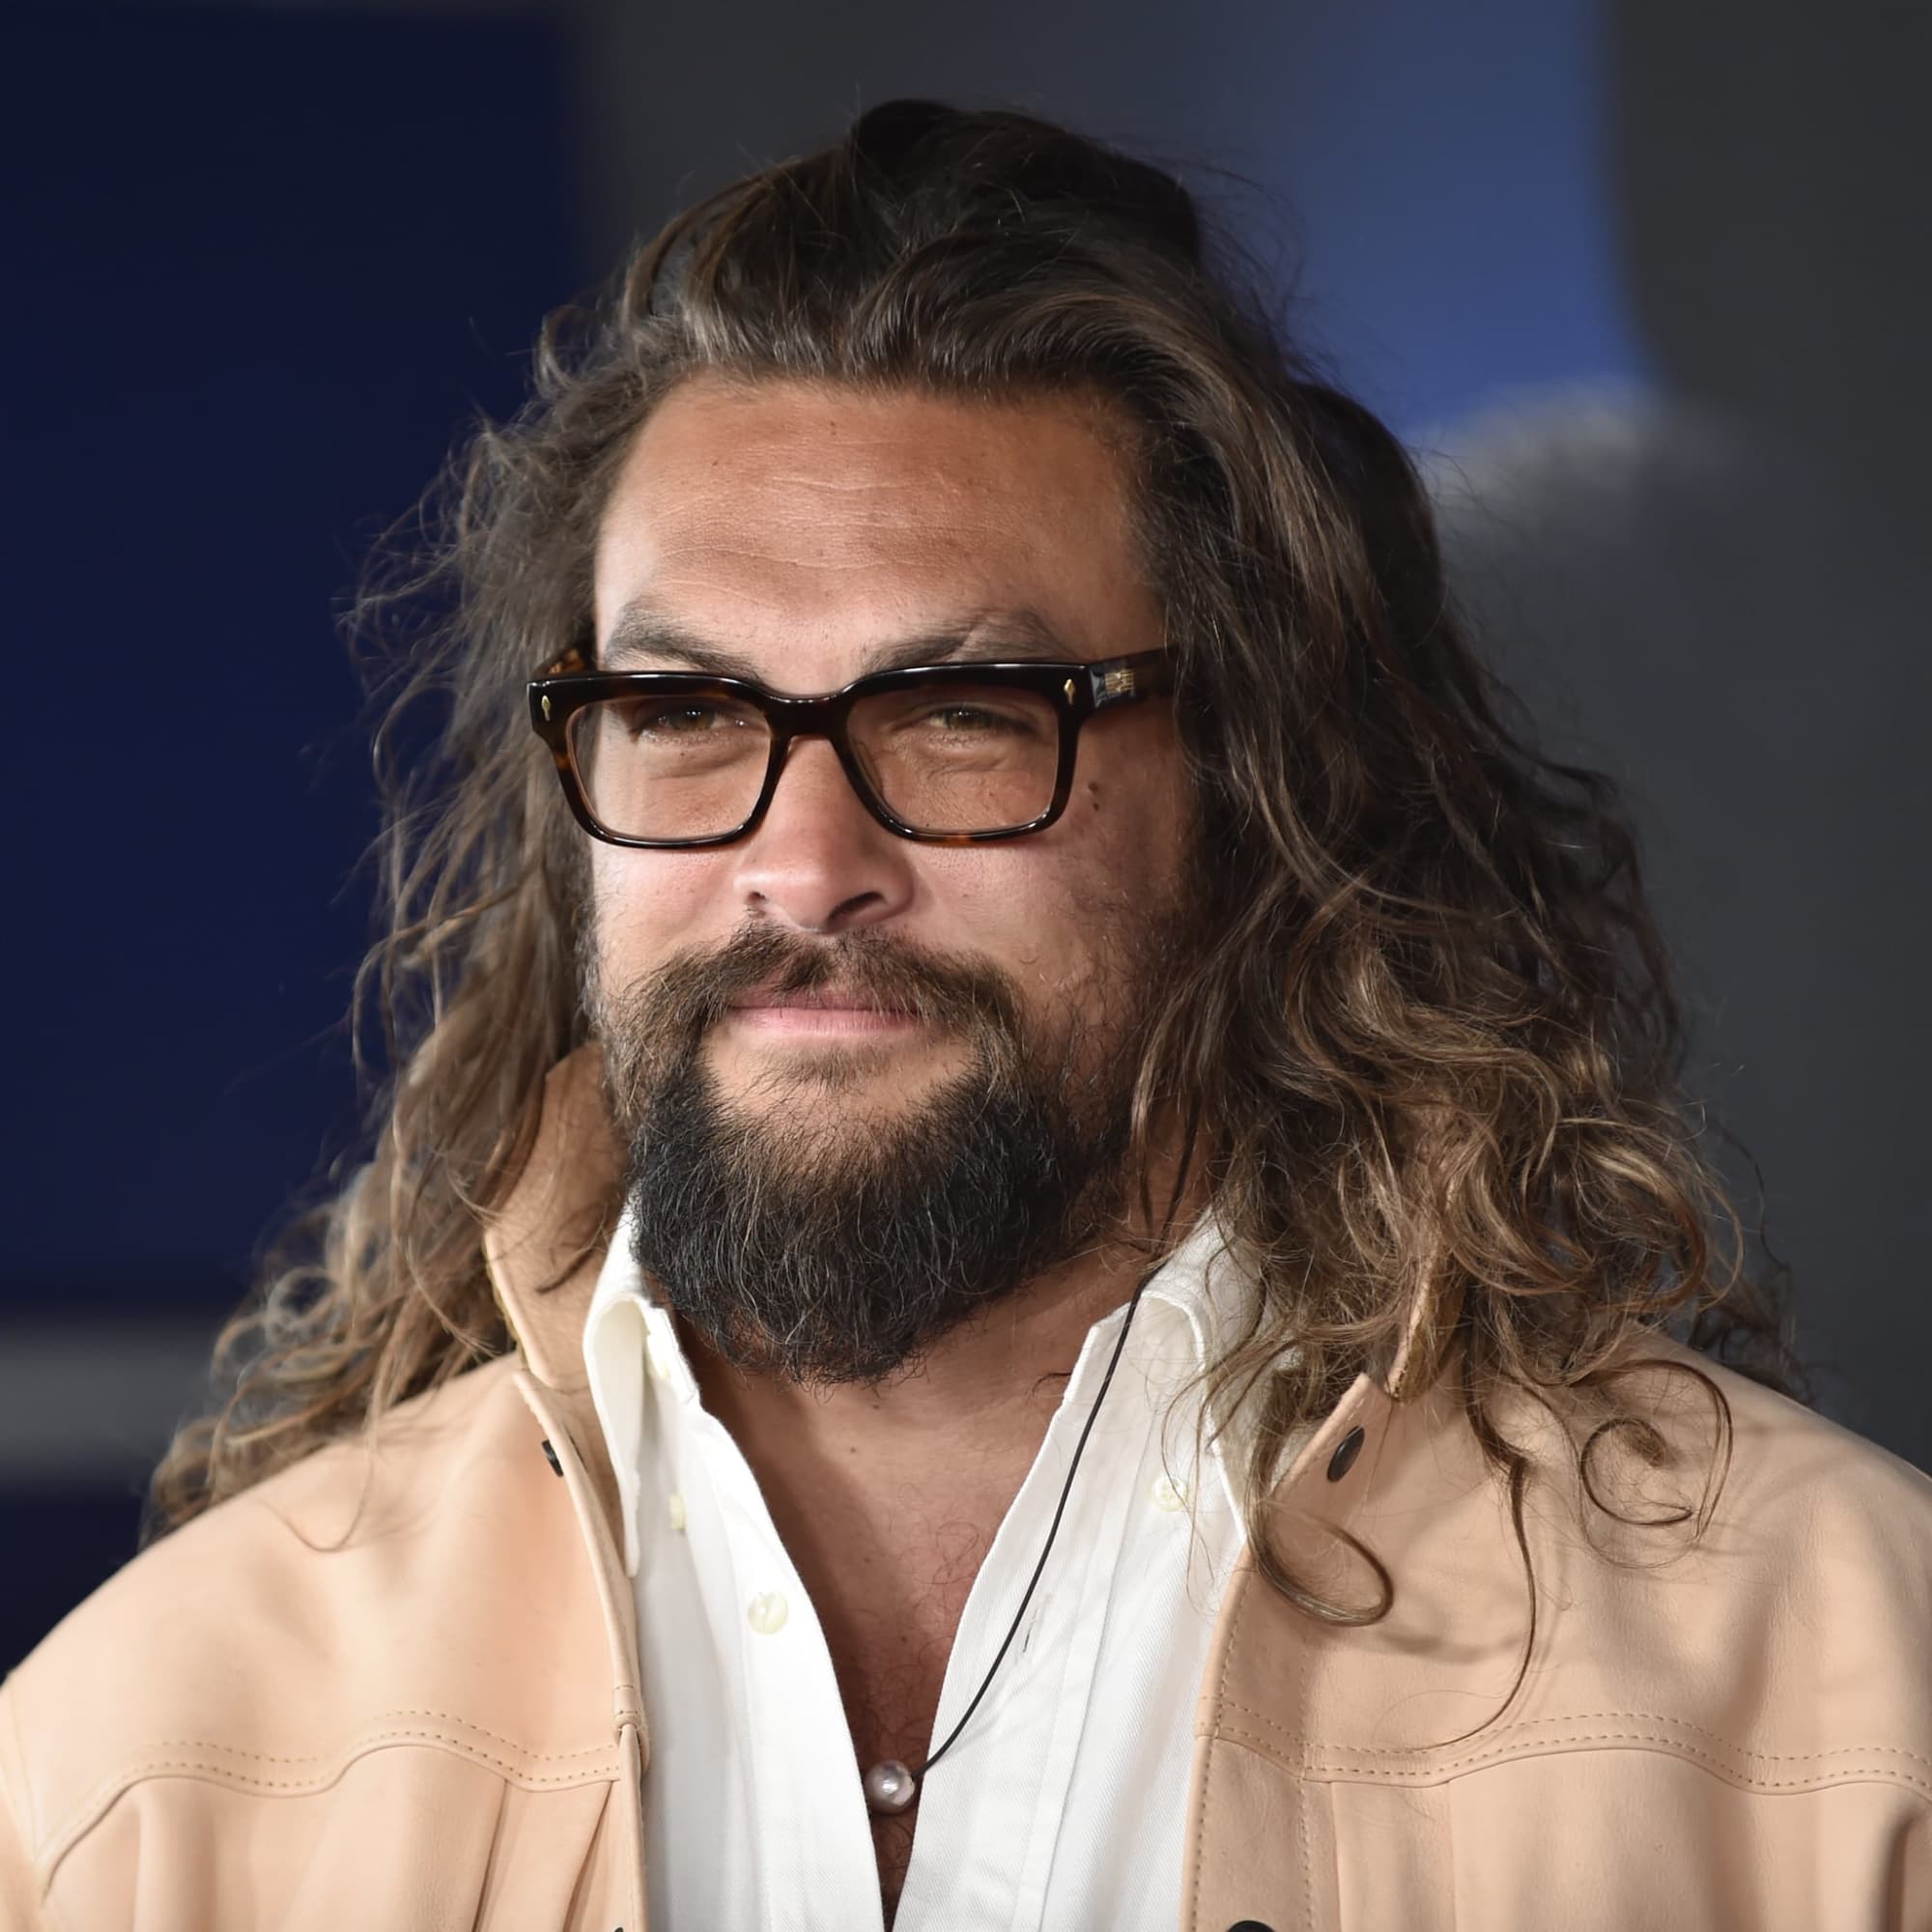 Jason Momoa and Eiza González Are Dating After the 